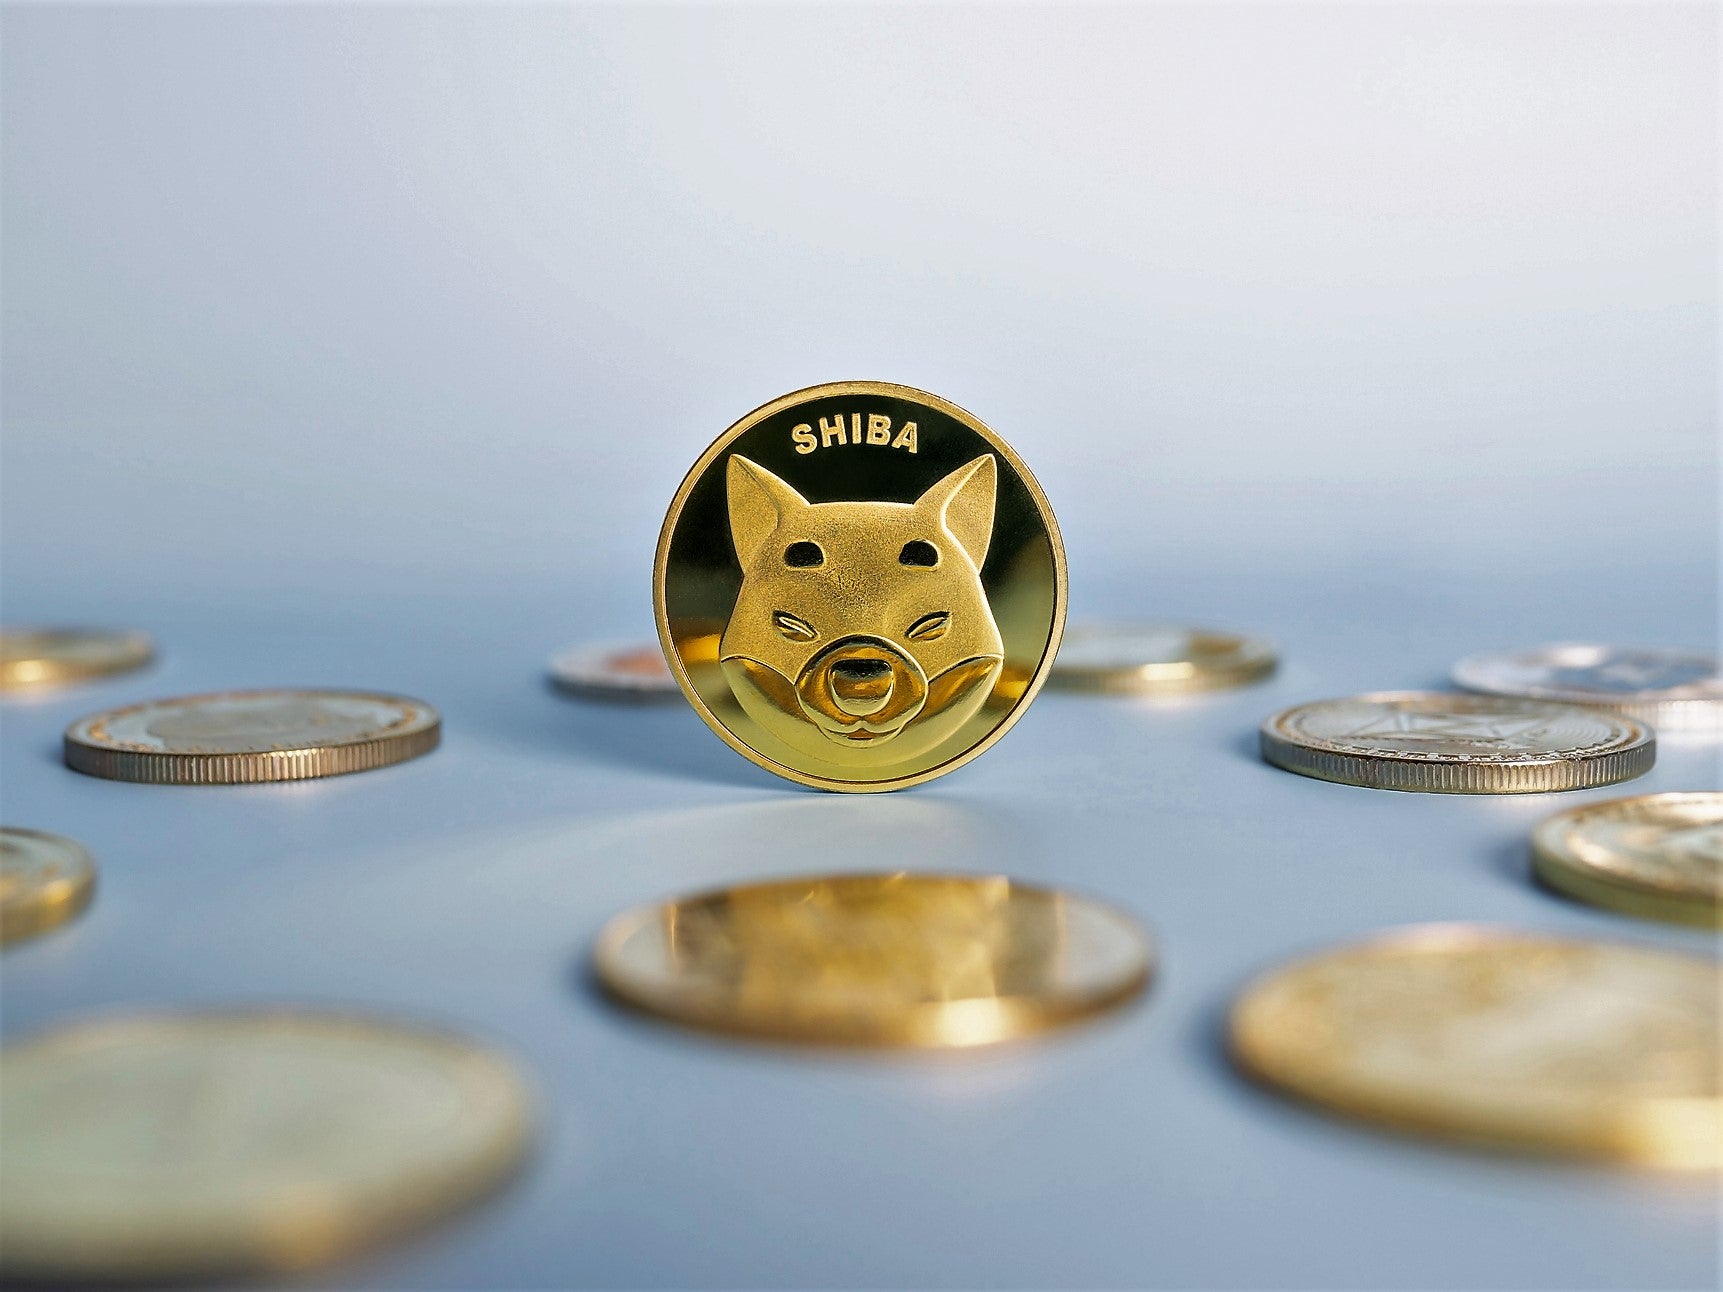 Shiba Inu coin is one of several meme coins to have seen astonishing price gains in 2021